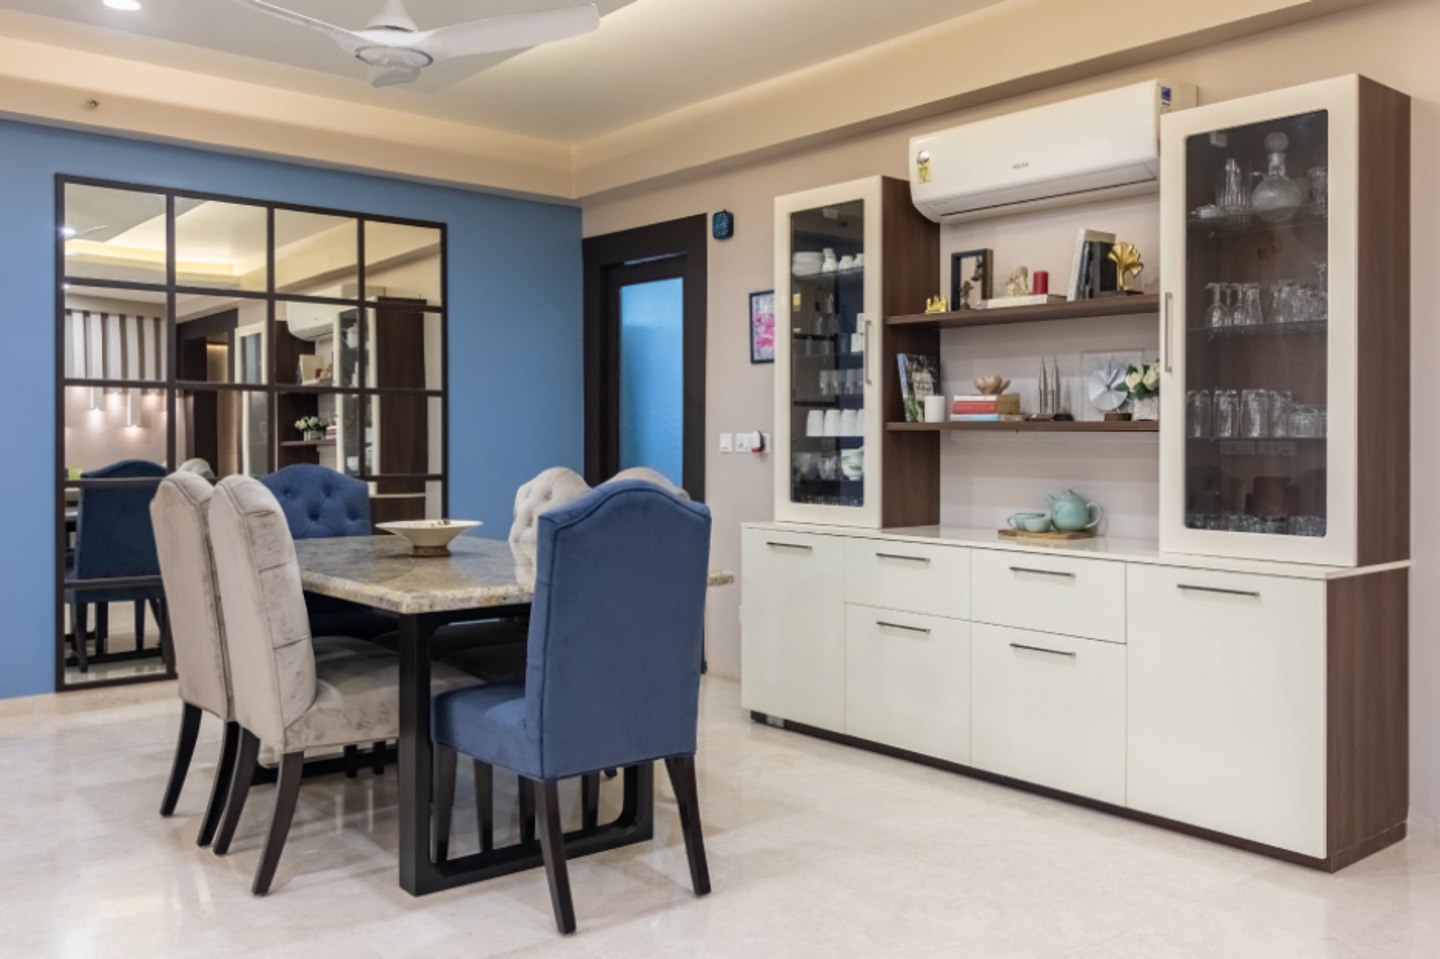 Contemporary Blue And Grey Dining Room Design With White Crockery Unit